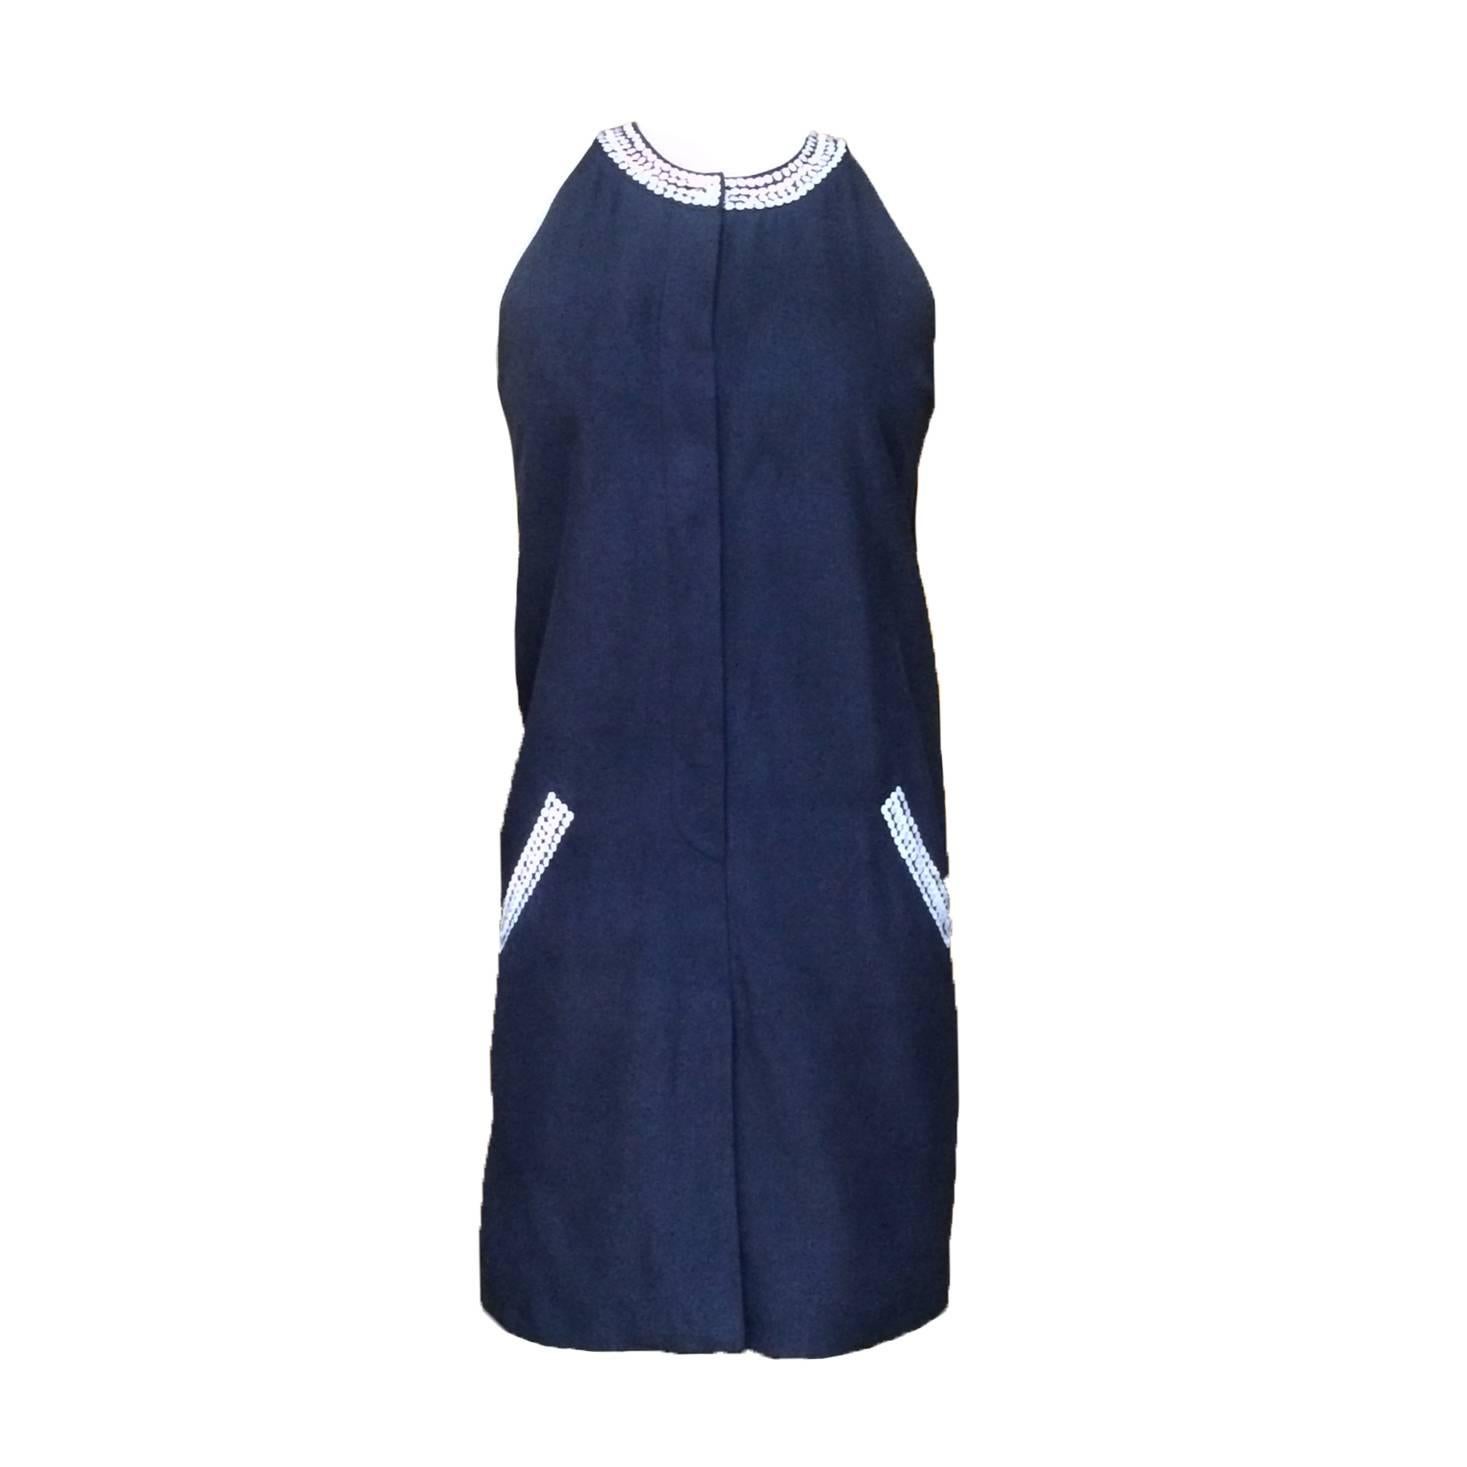 Stephen Sprouse 1980's Navy Shift Dress with White Sequin Accents